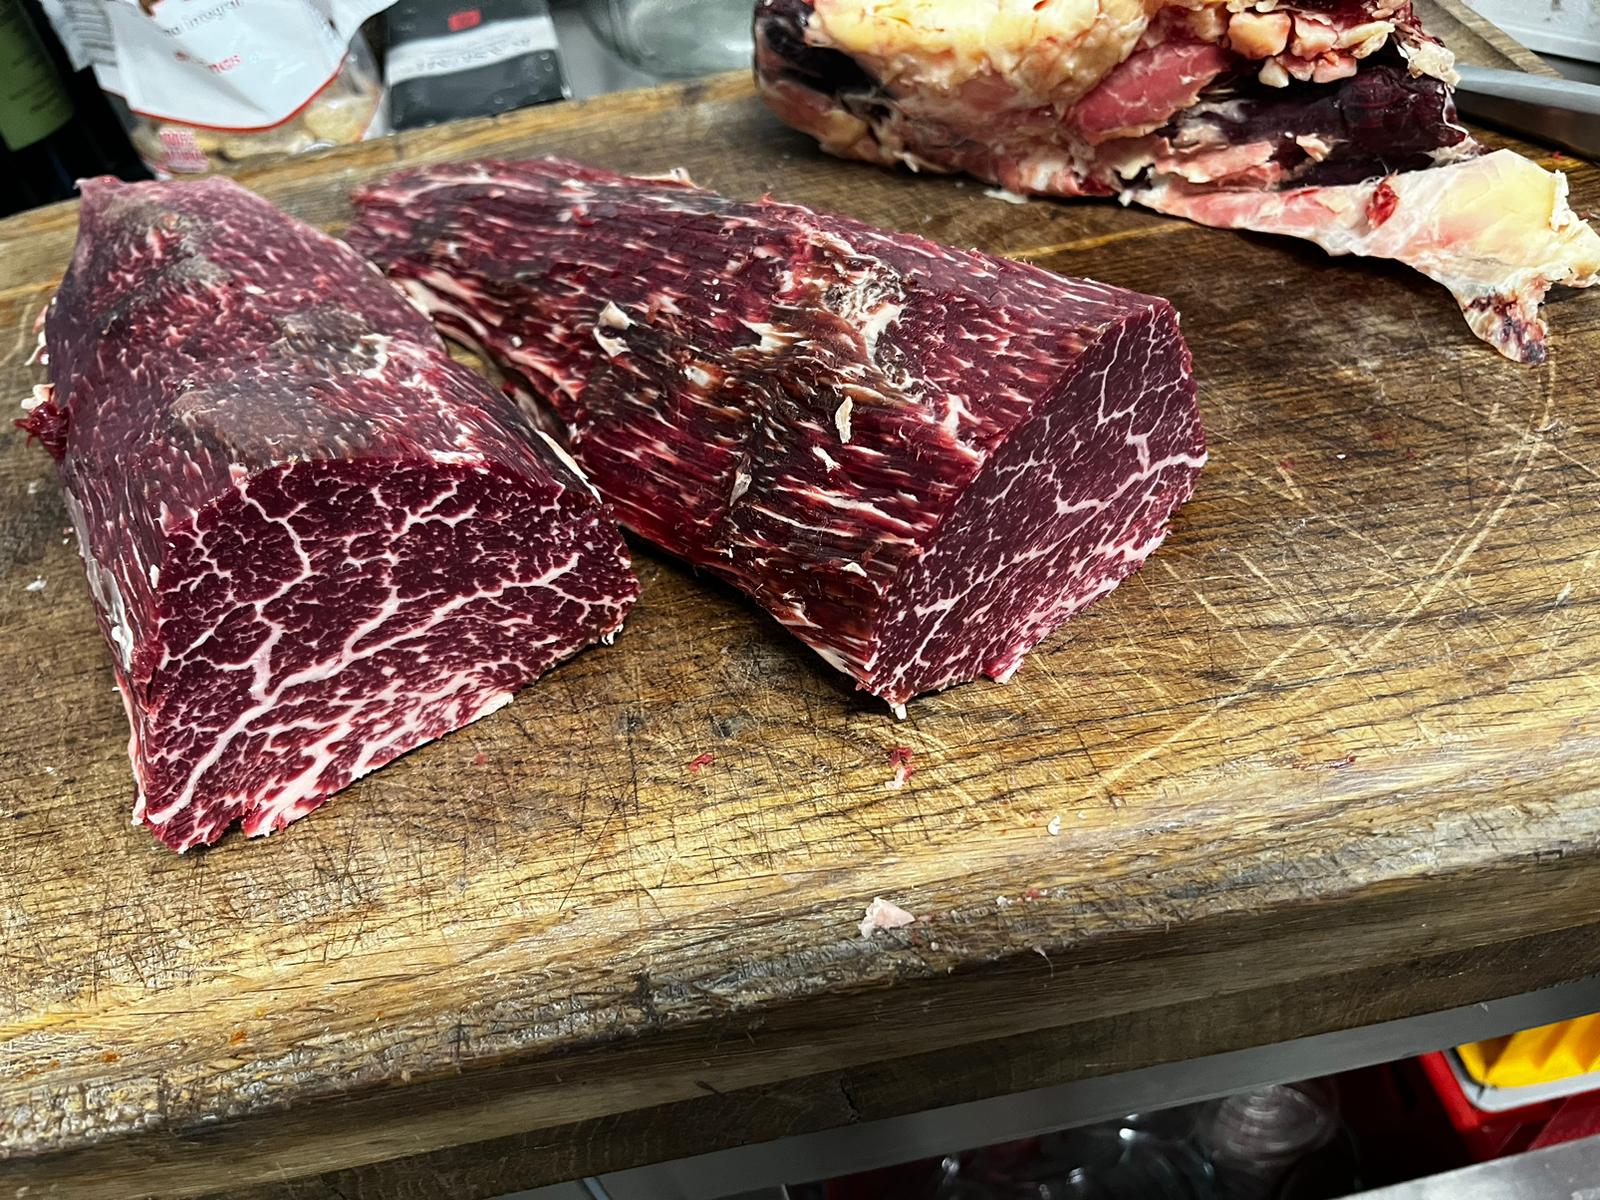 Rinderfilet vom Rotbunten Rind, Alte Kuh, Dry Aged